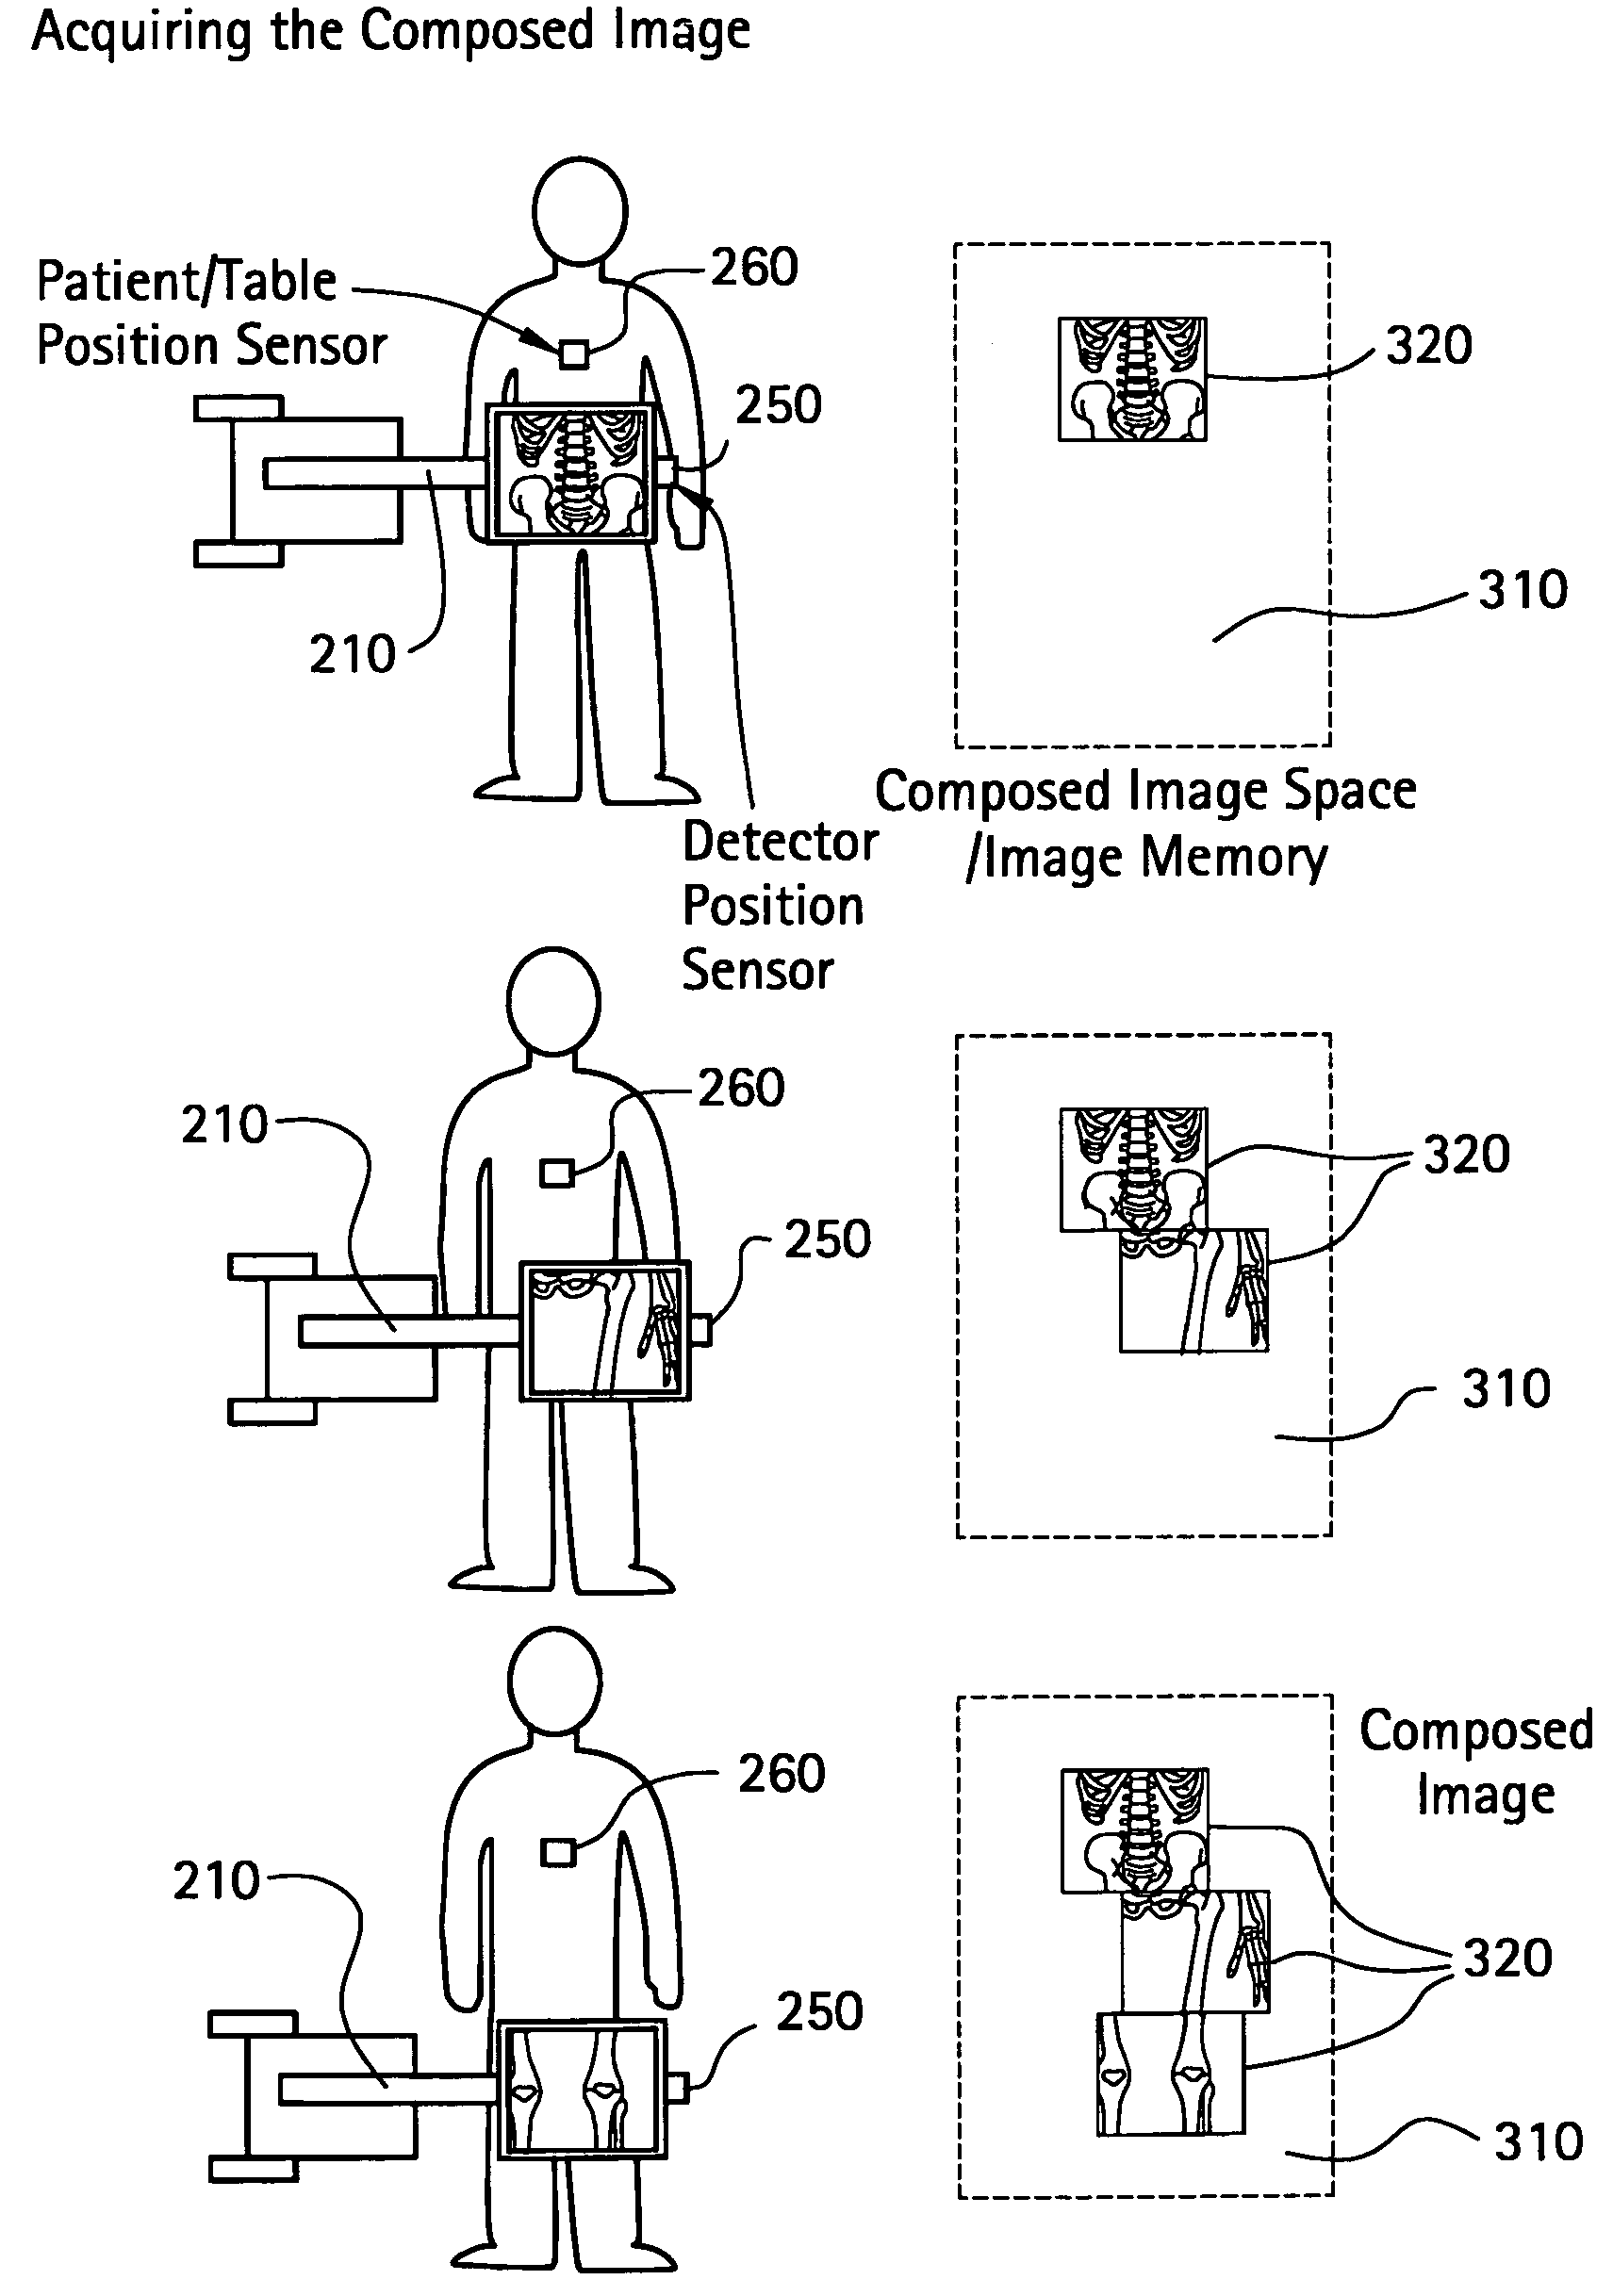 System and method for image composition using position sensors